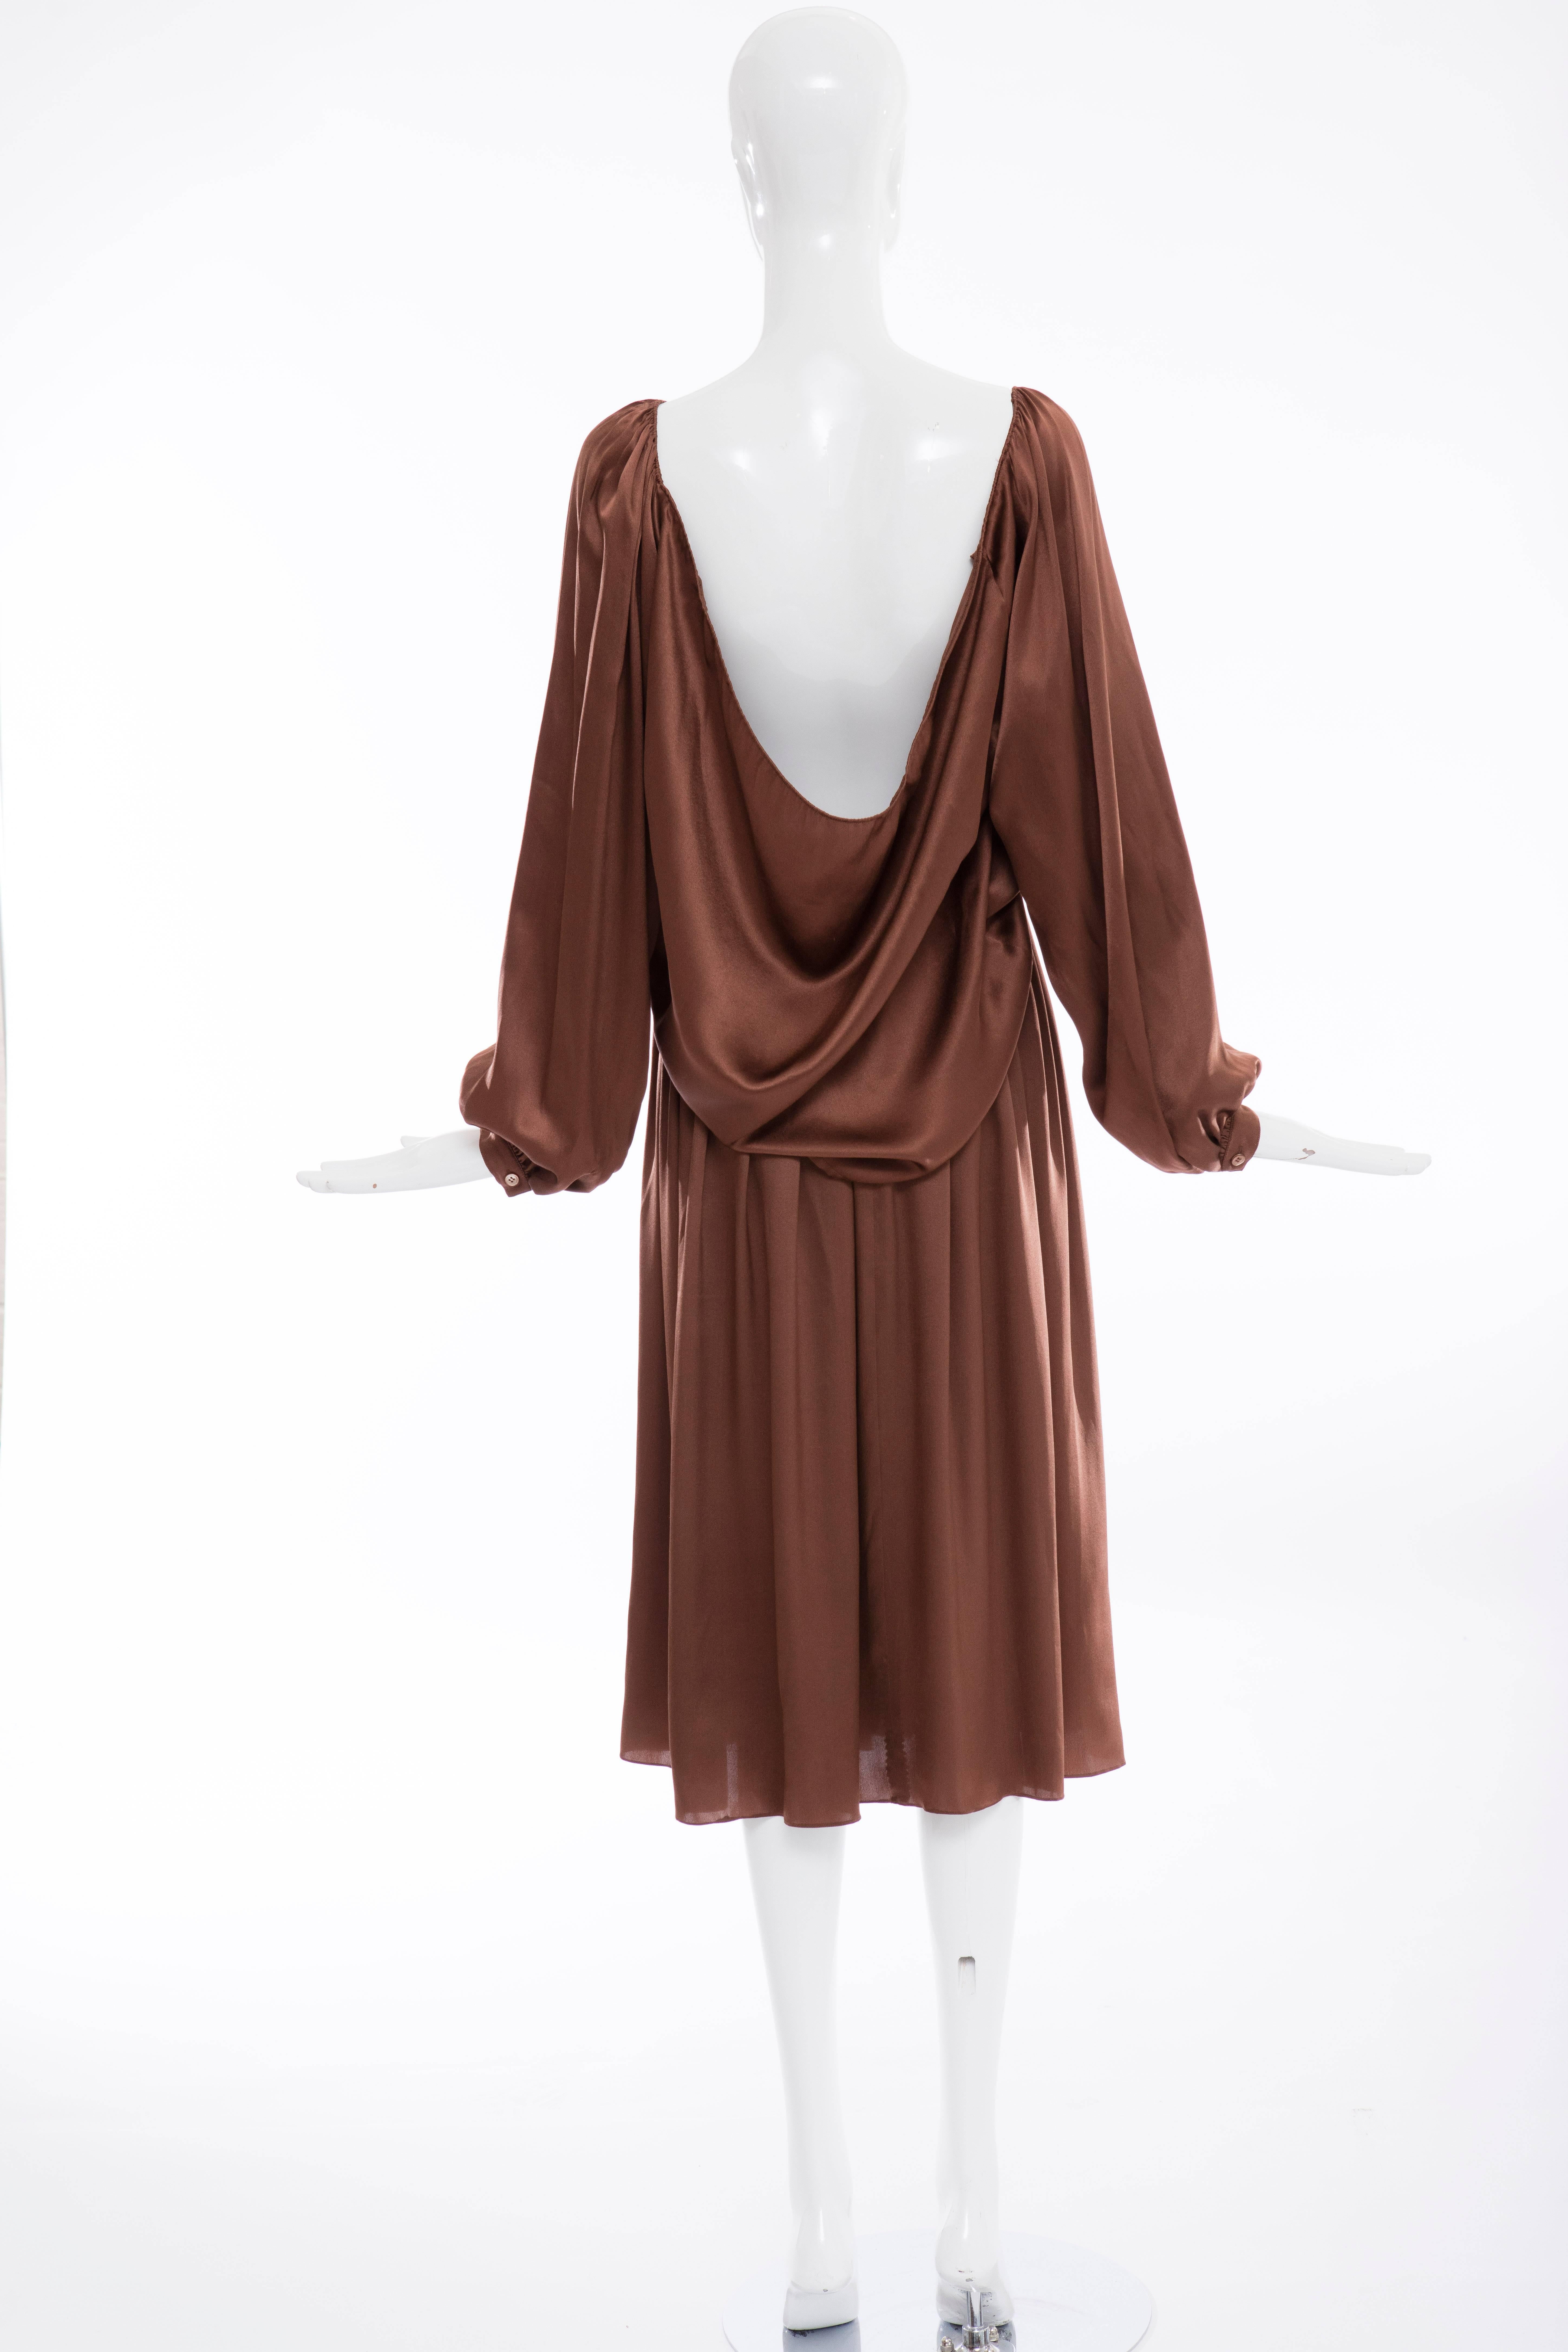 Calvin Klein Chocolate Brown Silk Charmeuse Skirt Suit, Circa 1970's In New Condition For Sale In Cincinnati, OH